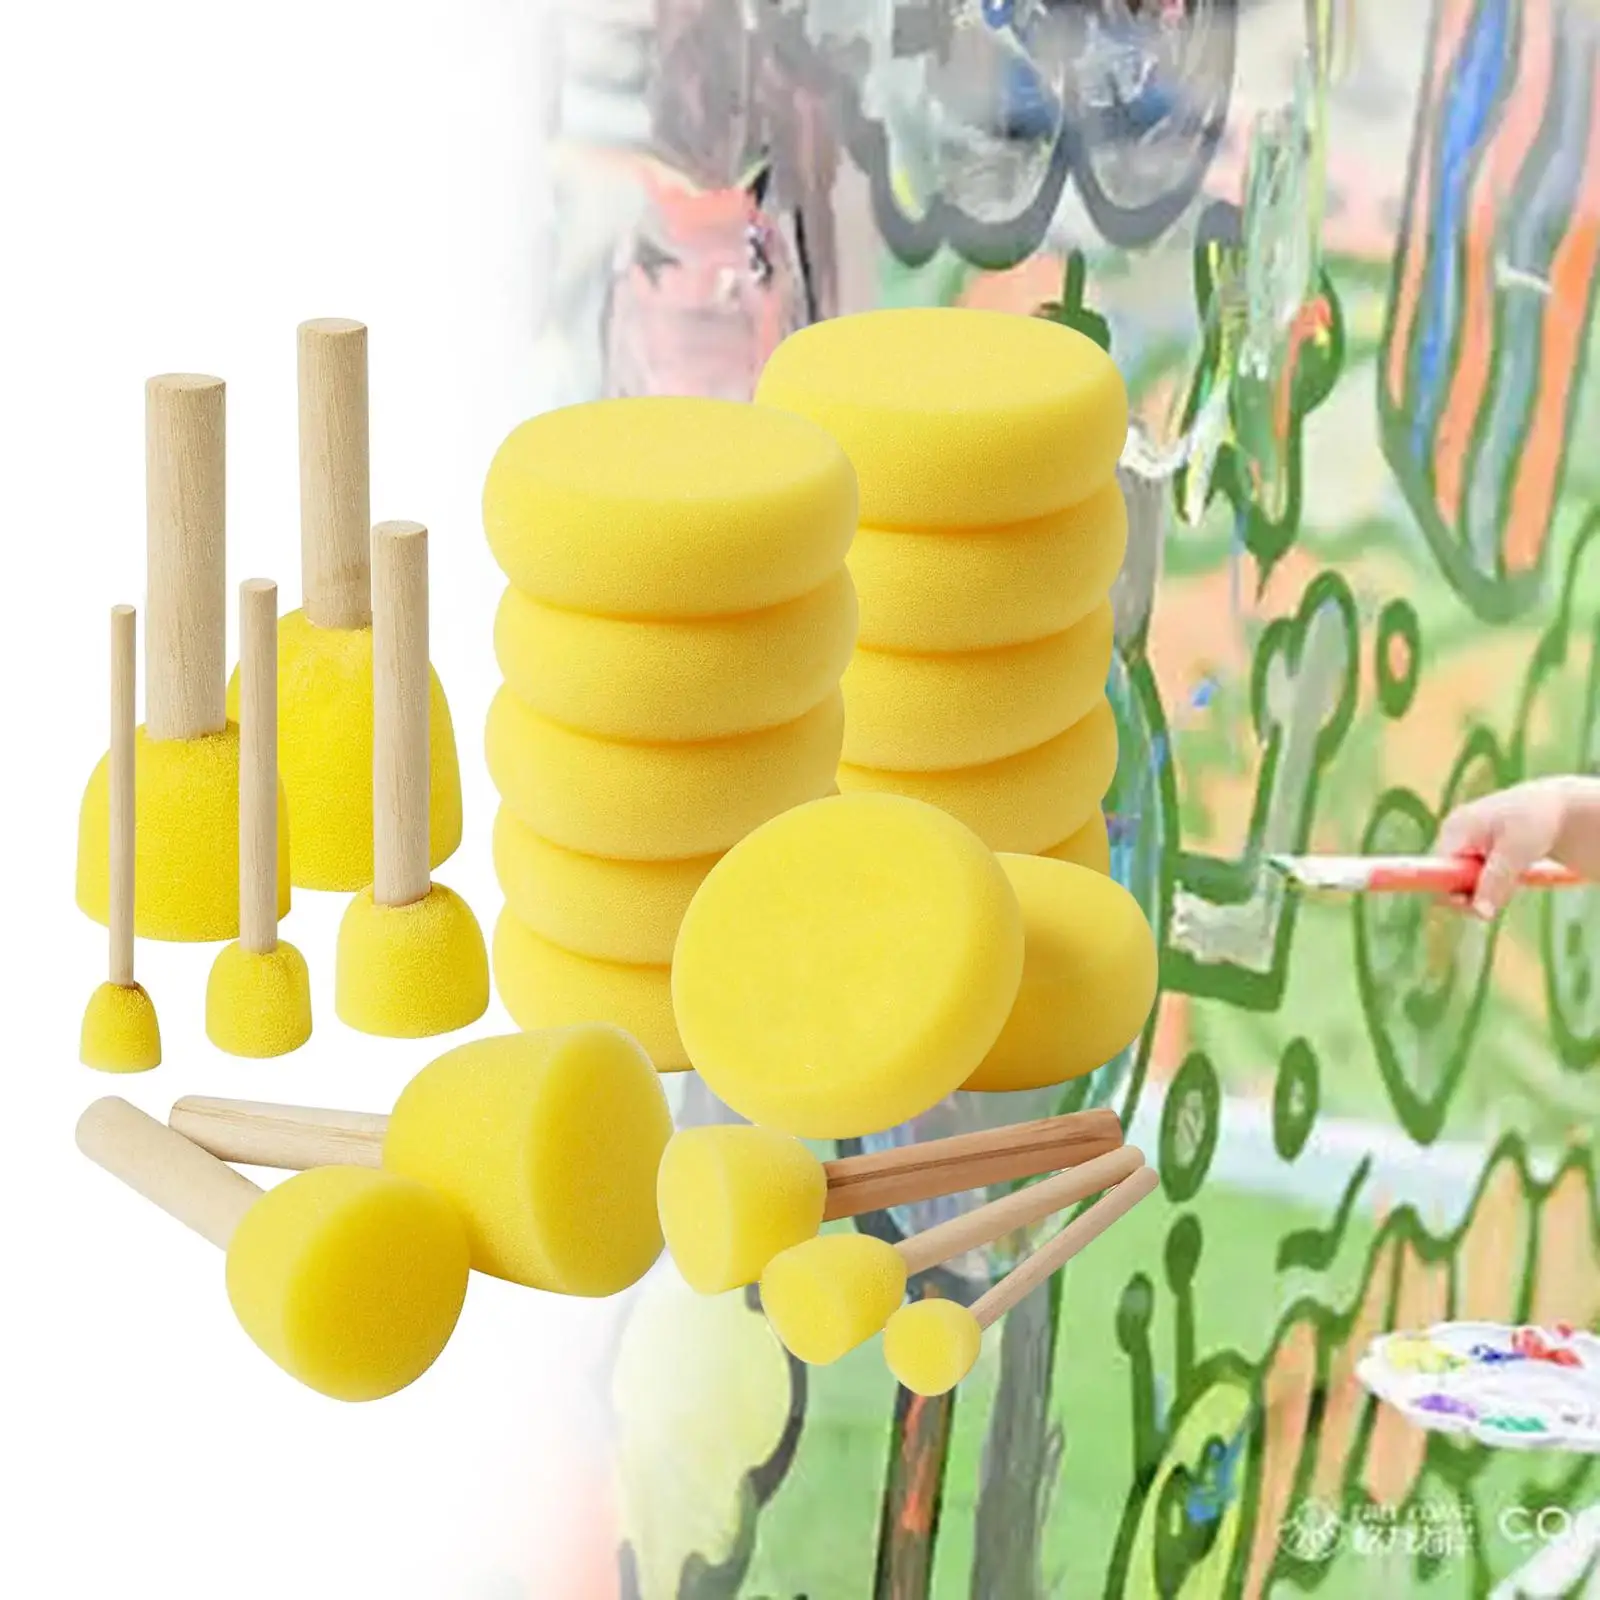 22 Pieces Sponge Stamp Toy Children Drawing Tools Foam Painting Brushes Kids Painting Supply Wooden Handle Paint Sponges